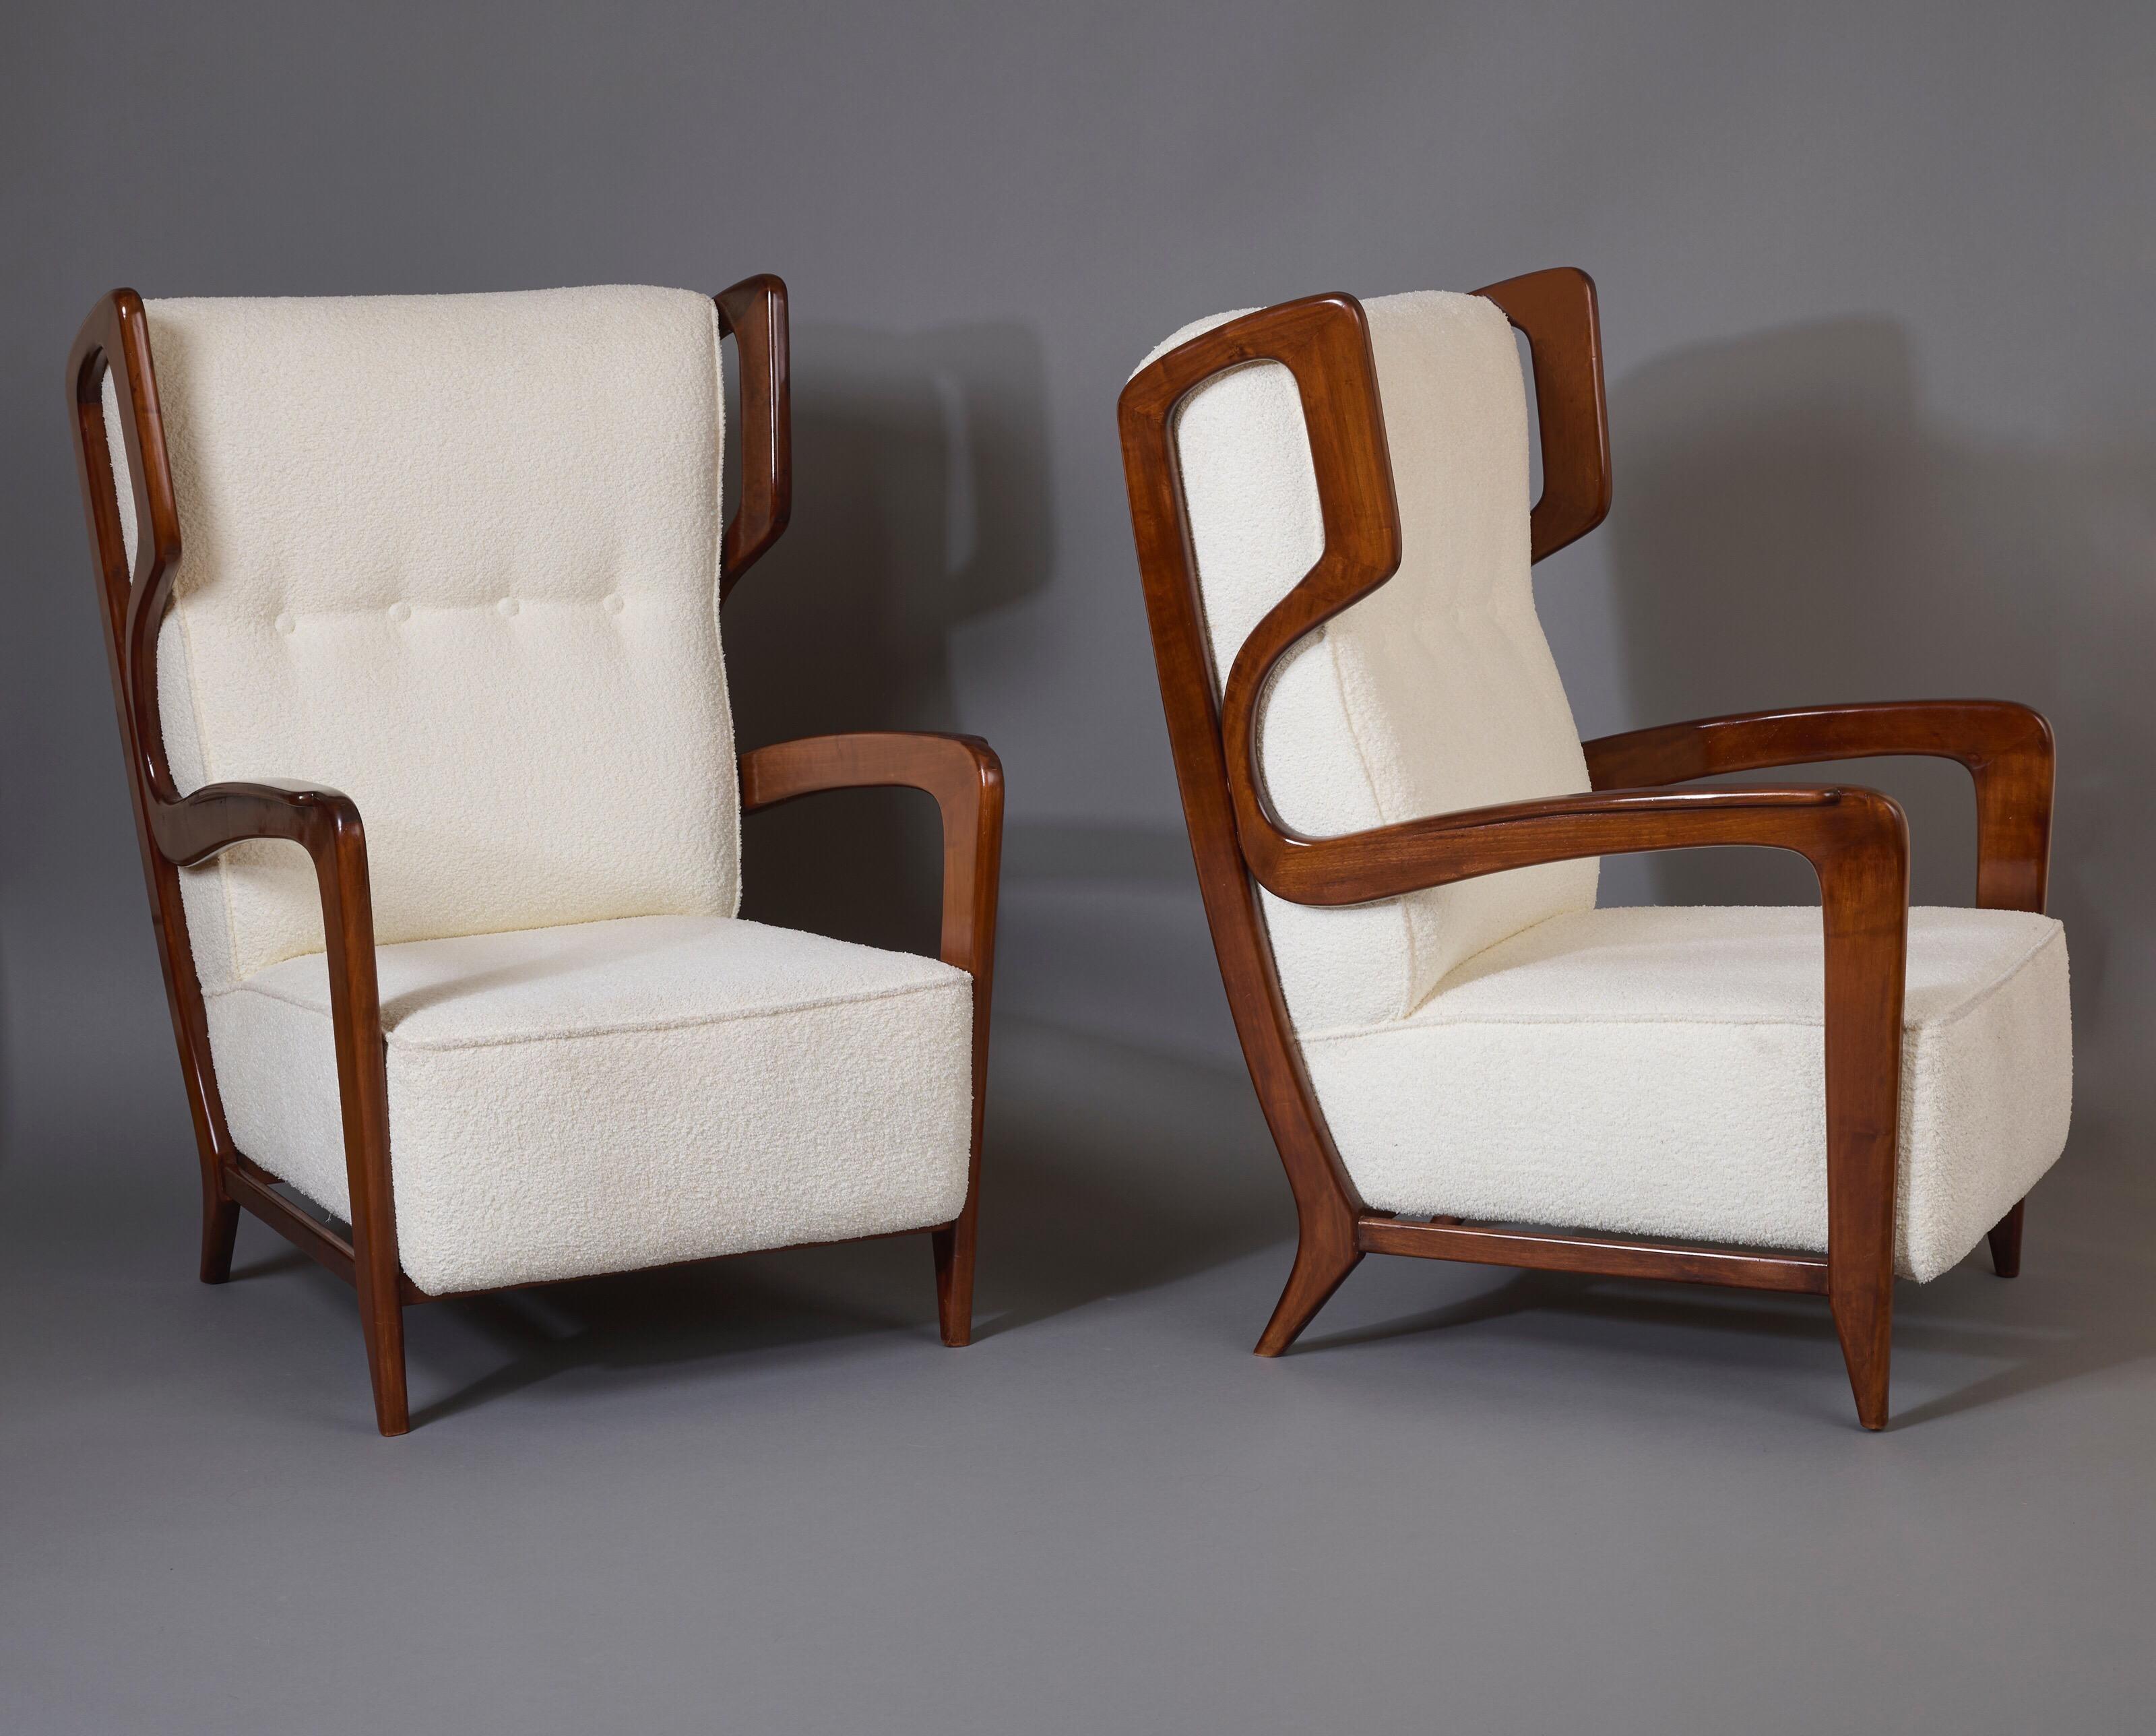 Mid-20th Century Gio Ponti, Exceptional Pair of Rare Wingback Armchairs in Walnut, Italy, 1940s For Sale